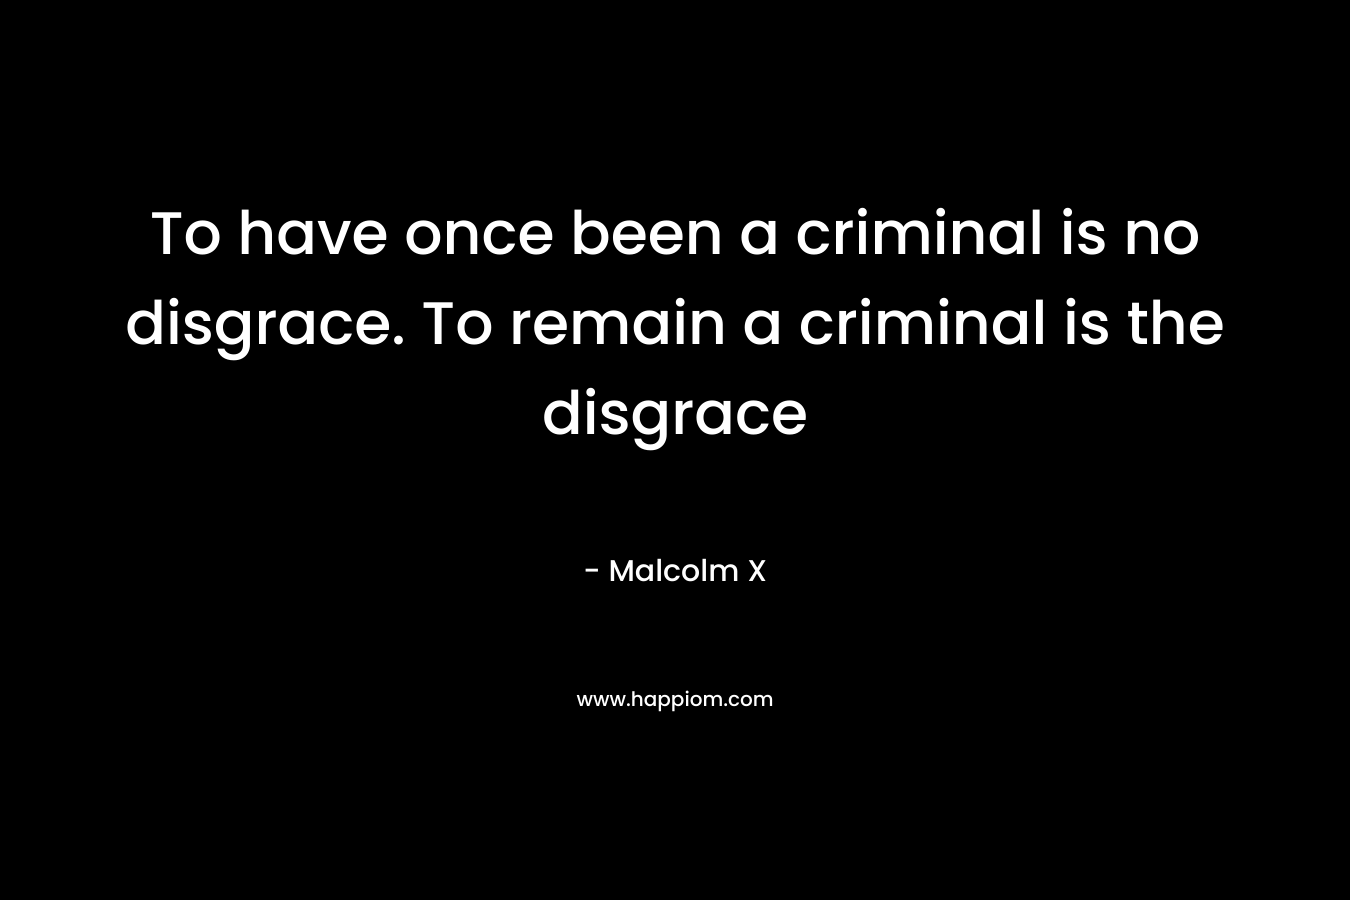 To have once been a criminal is no disgrace. To remain a criminal is the disgrace